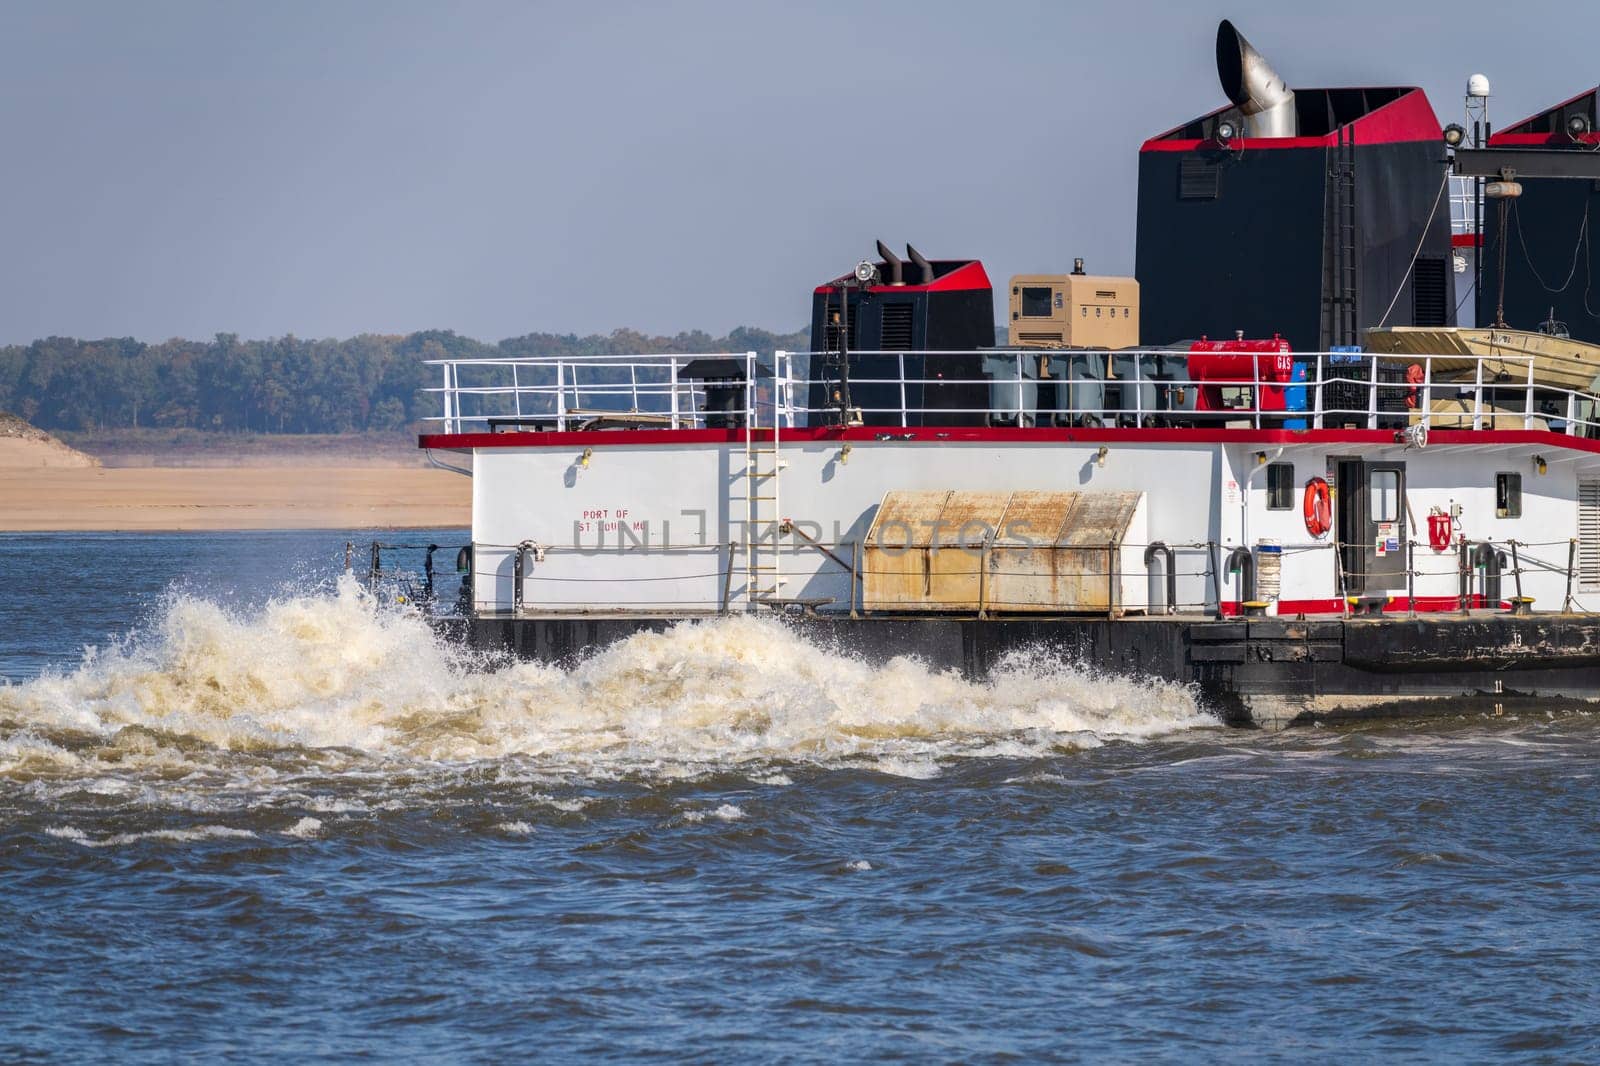 Rear of Mississippi river pusher boat churning the water by steheap